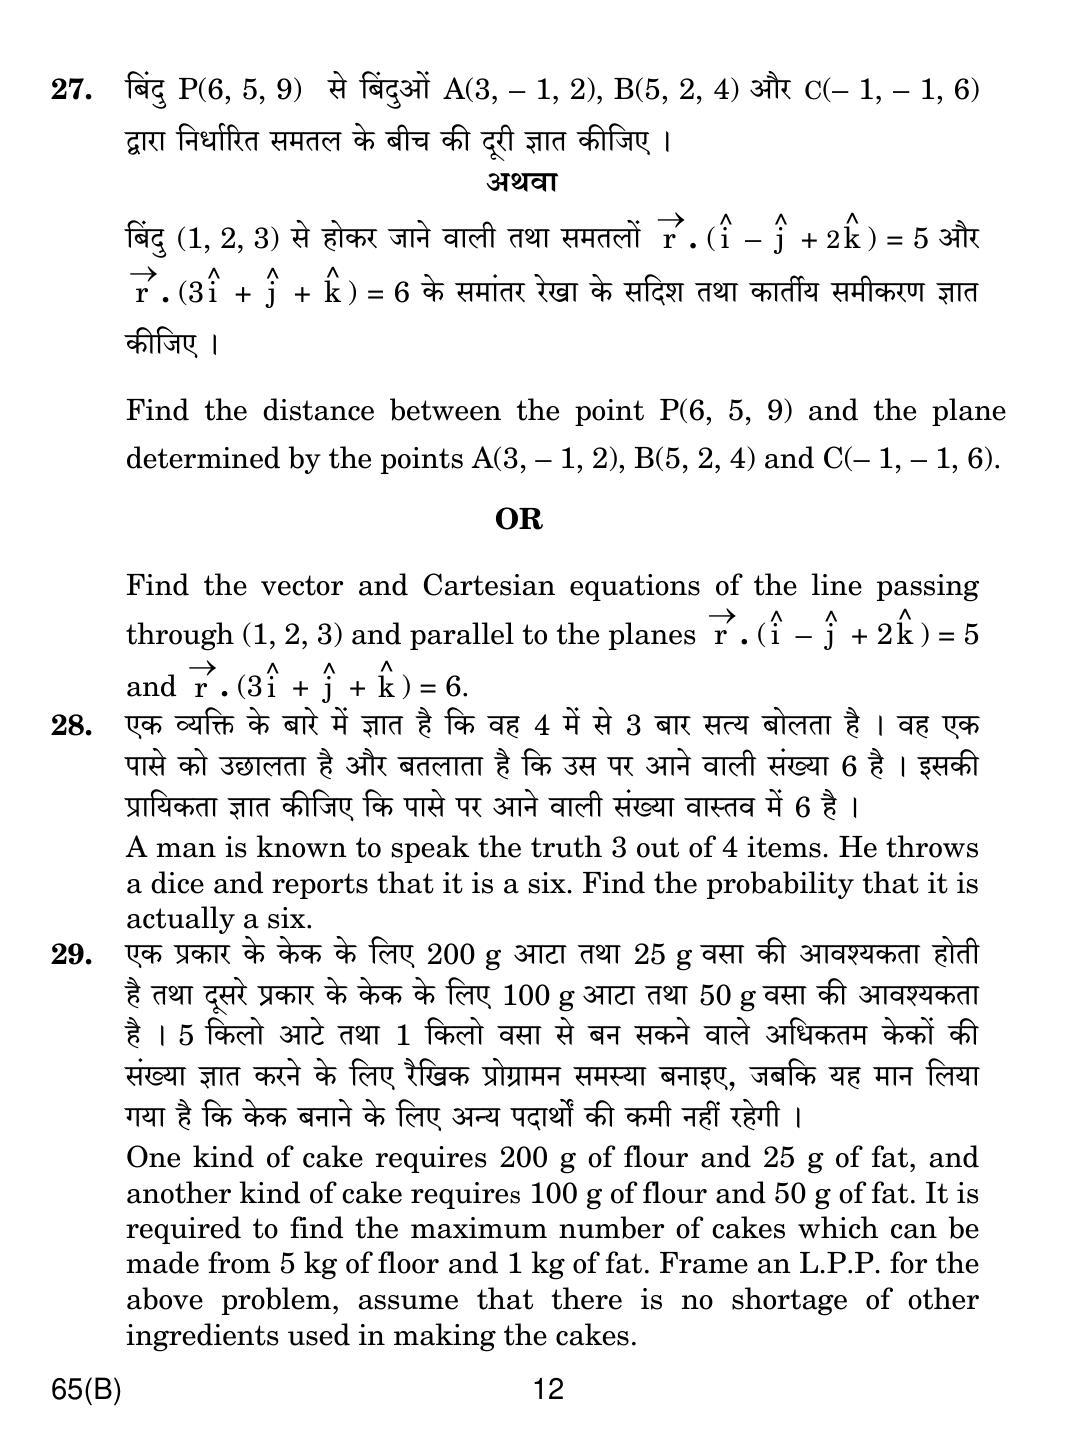 CBSE Class 12 65(B) MATHS For Blind Candidates 2019 Compartment Question Paper - Page 12